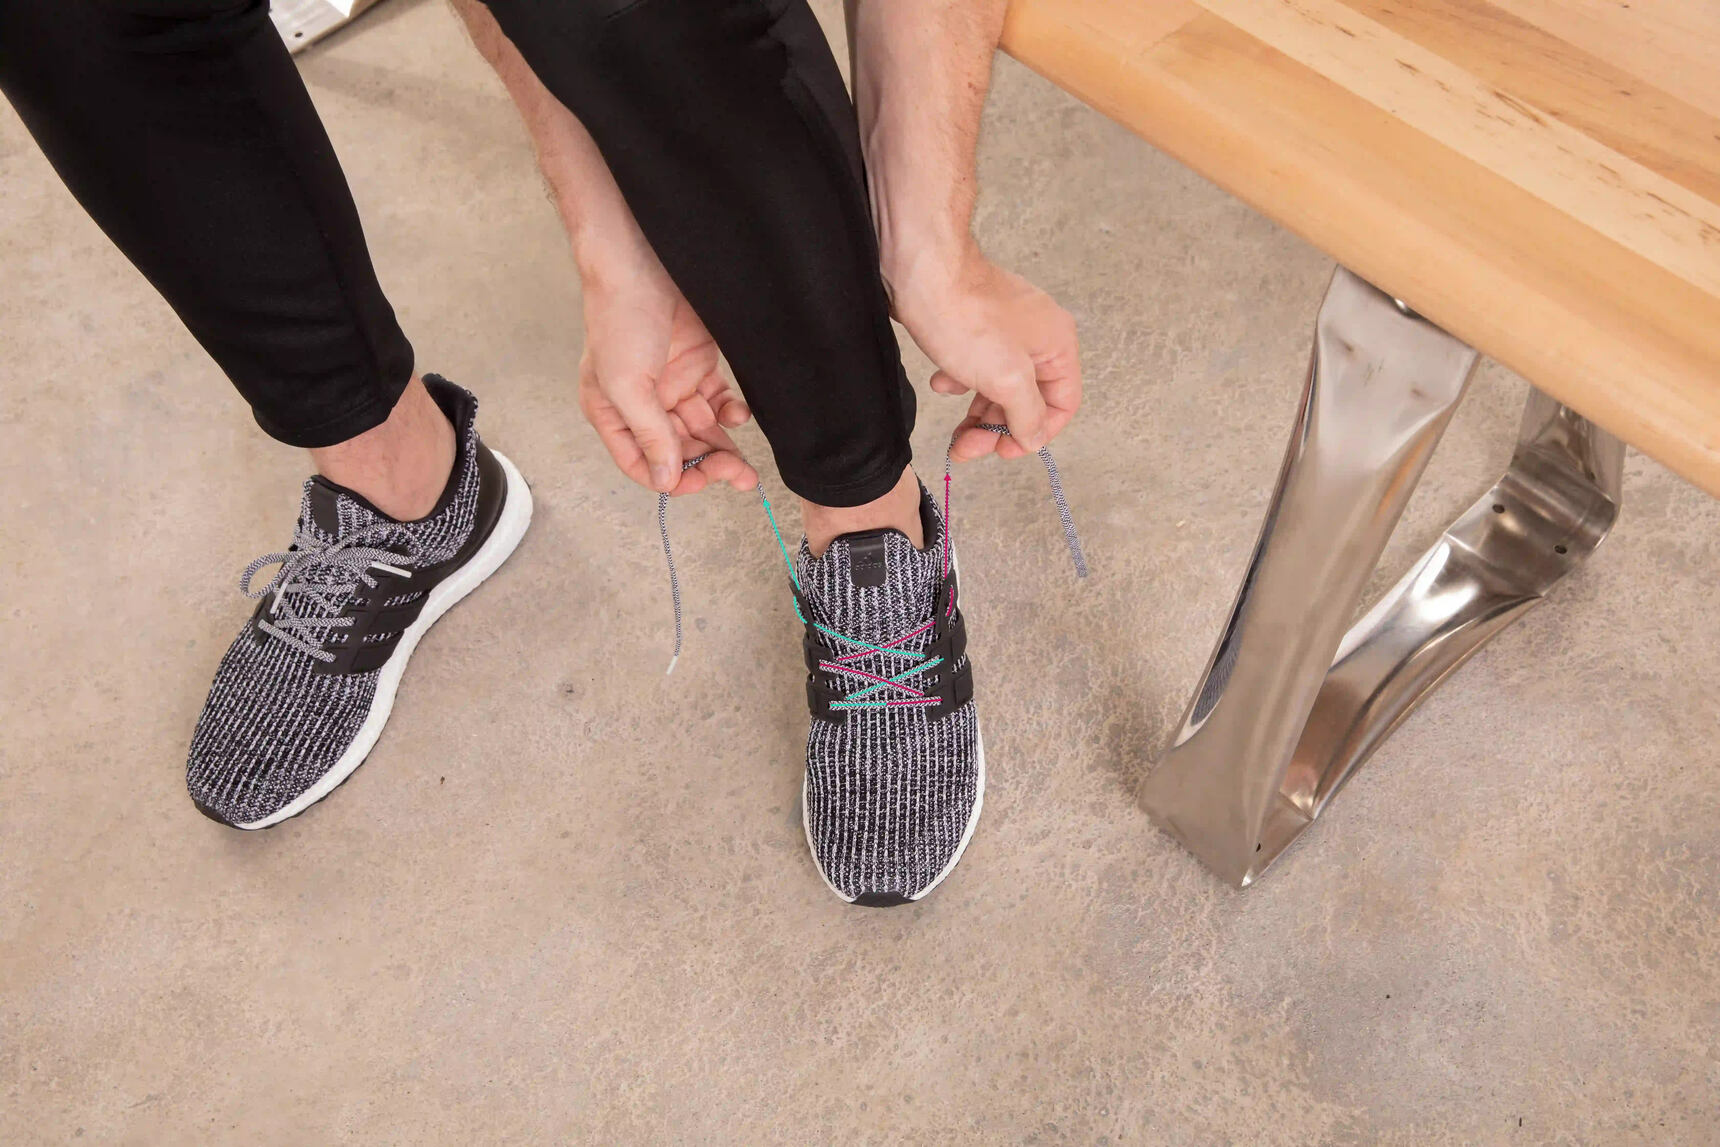 How To Lace My Running Shoes So Heel Doesnt Slip